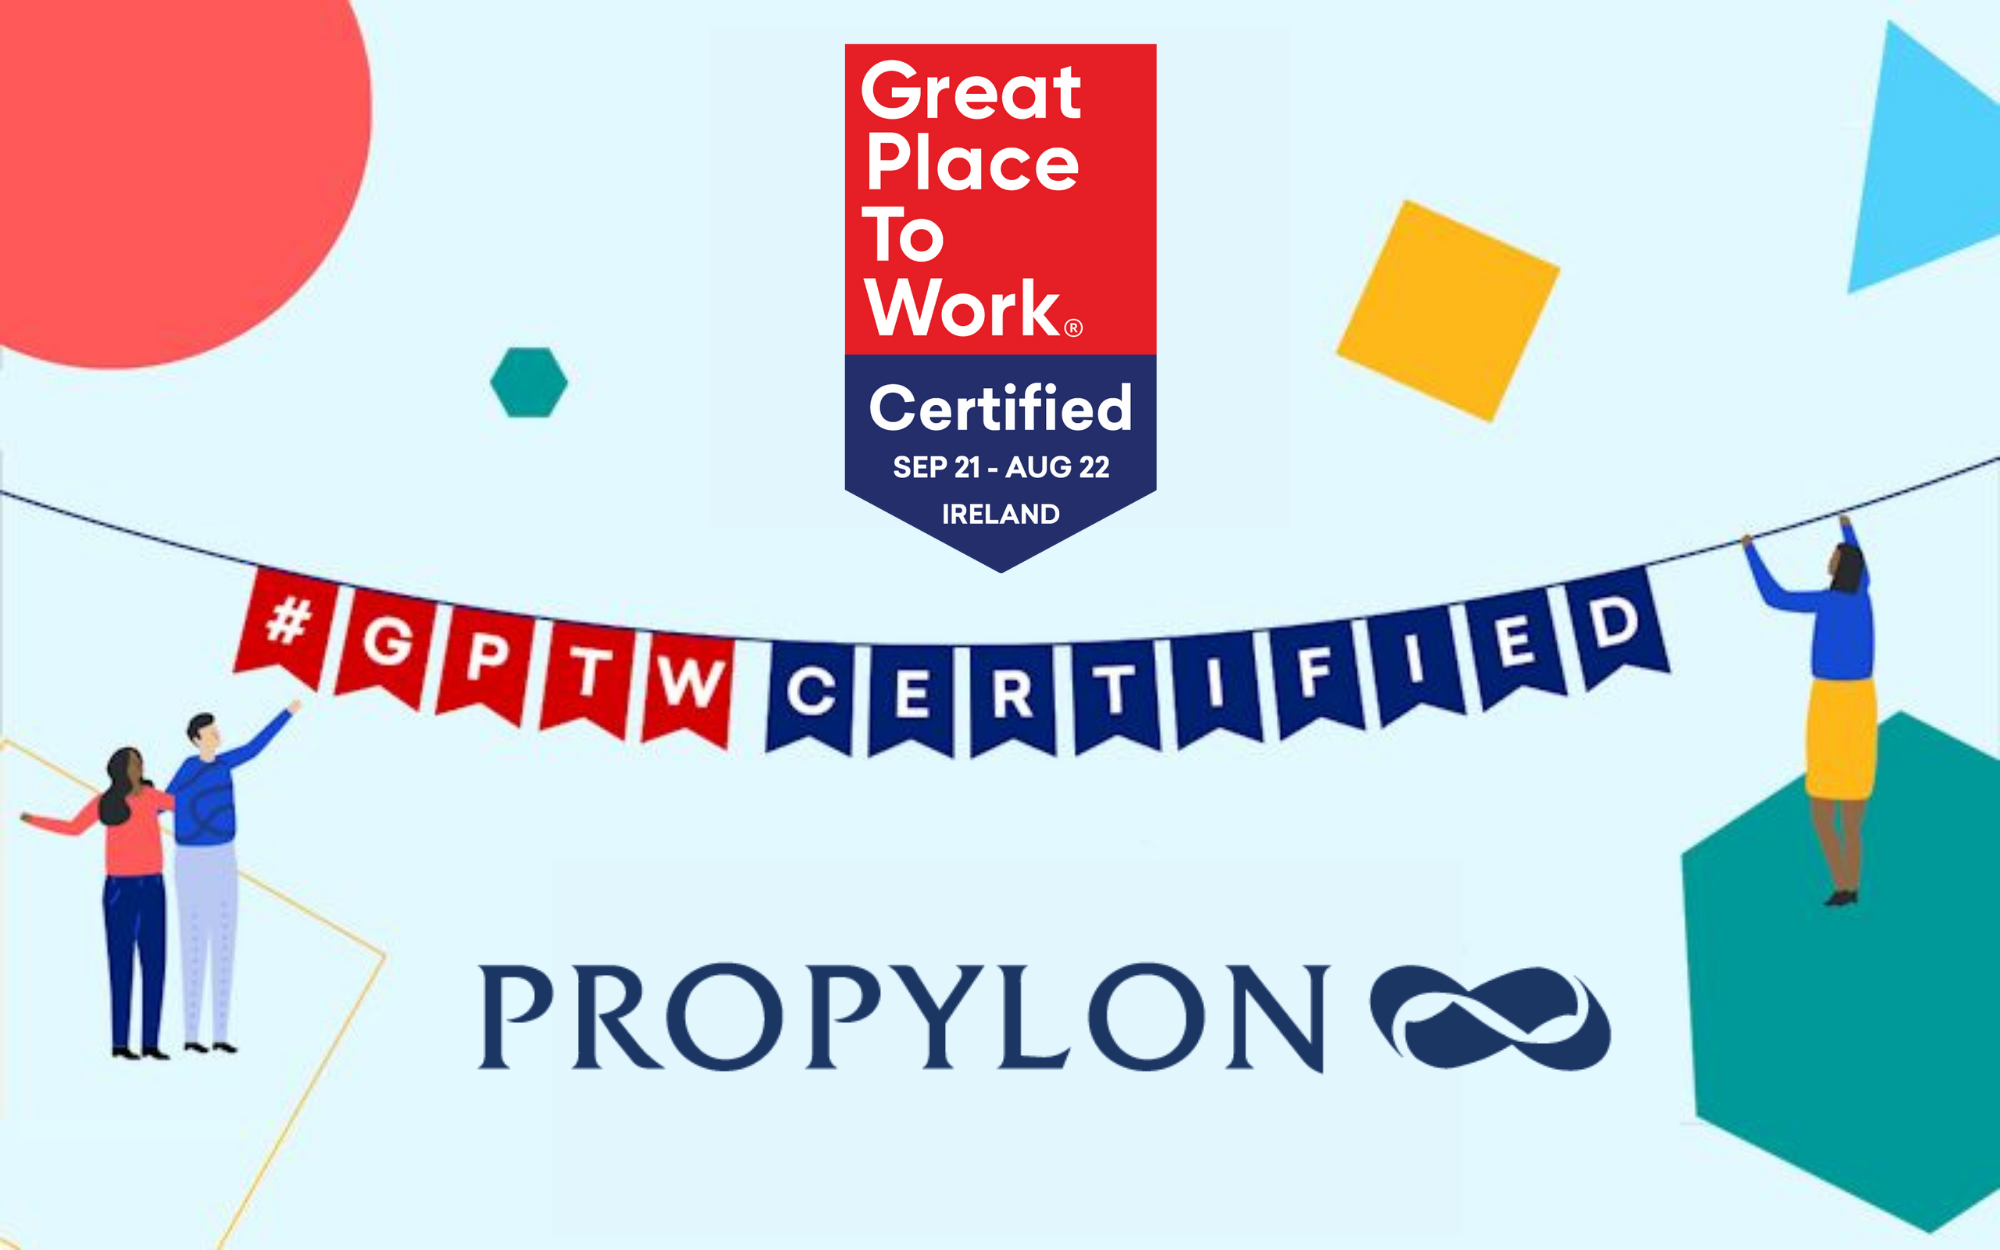 Propylon certified a great place to work